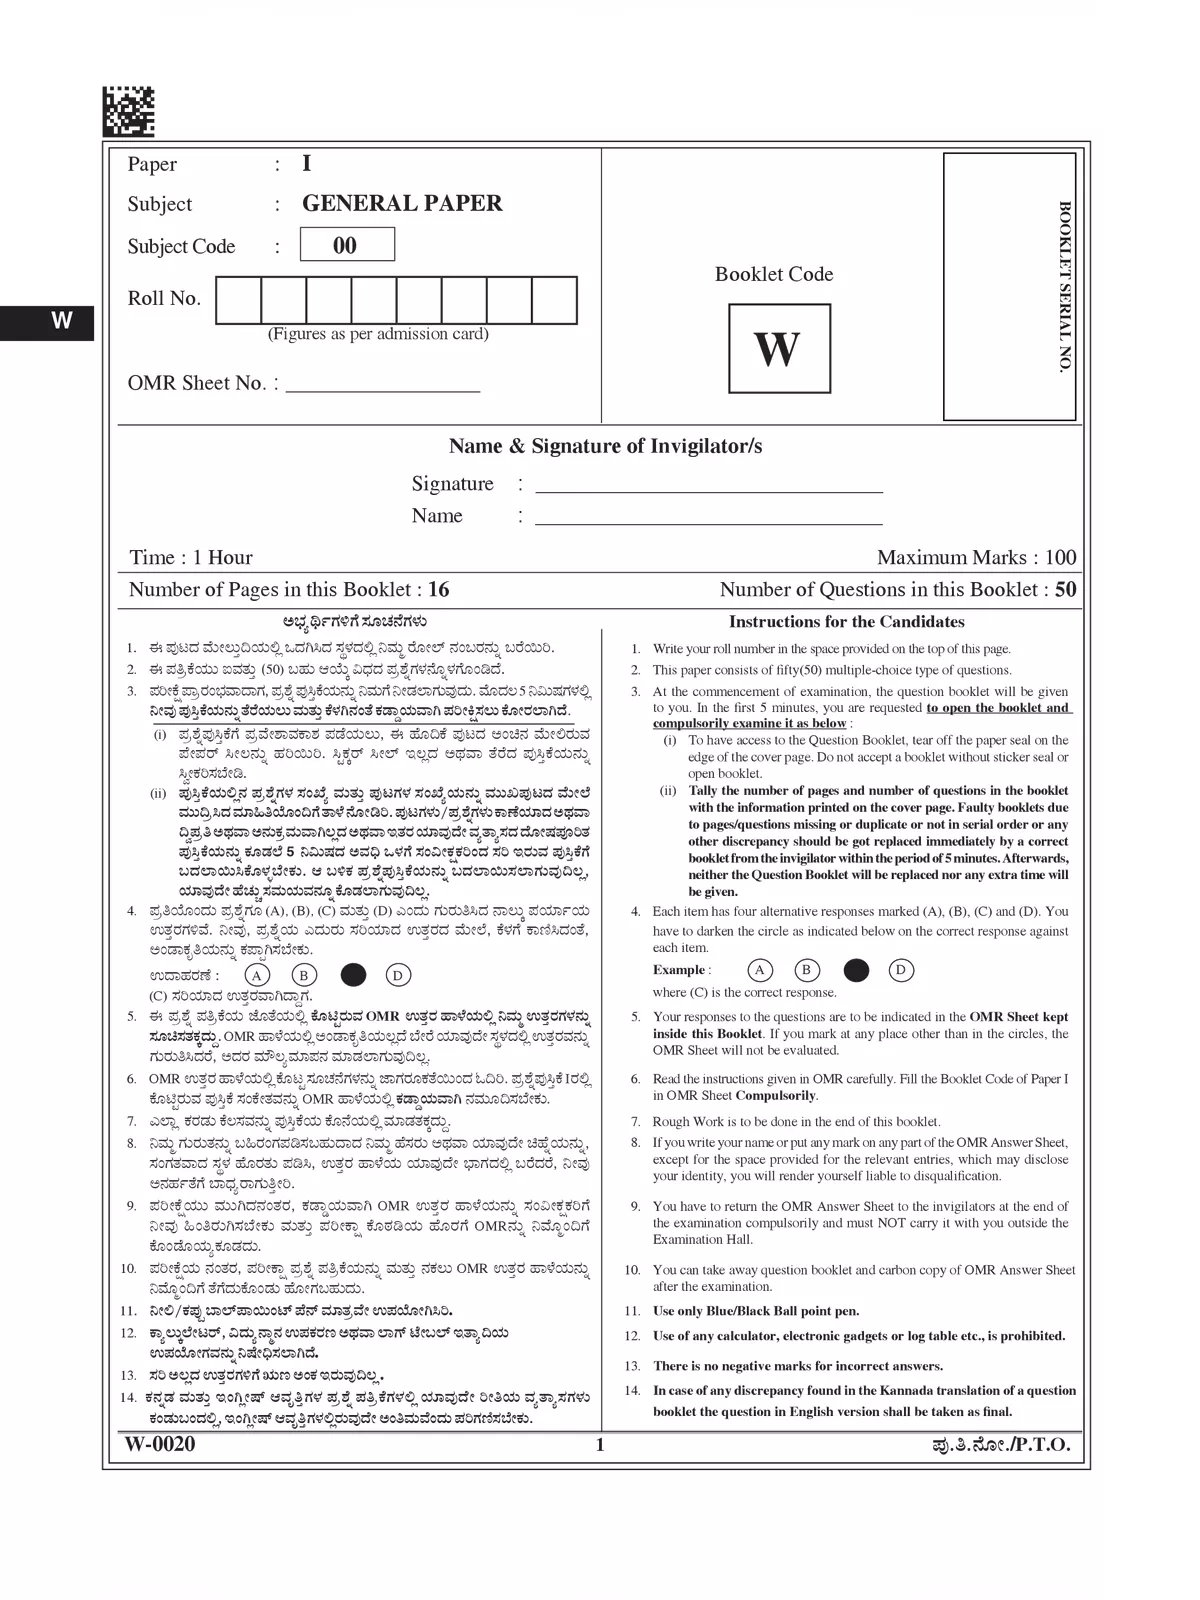 KSET Question Papers with Answers